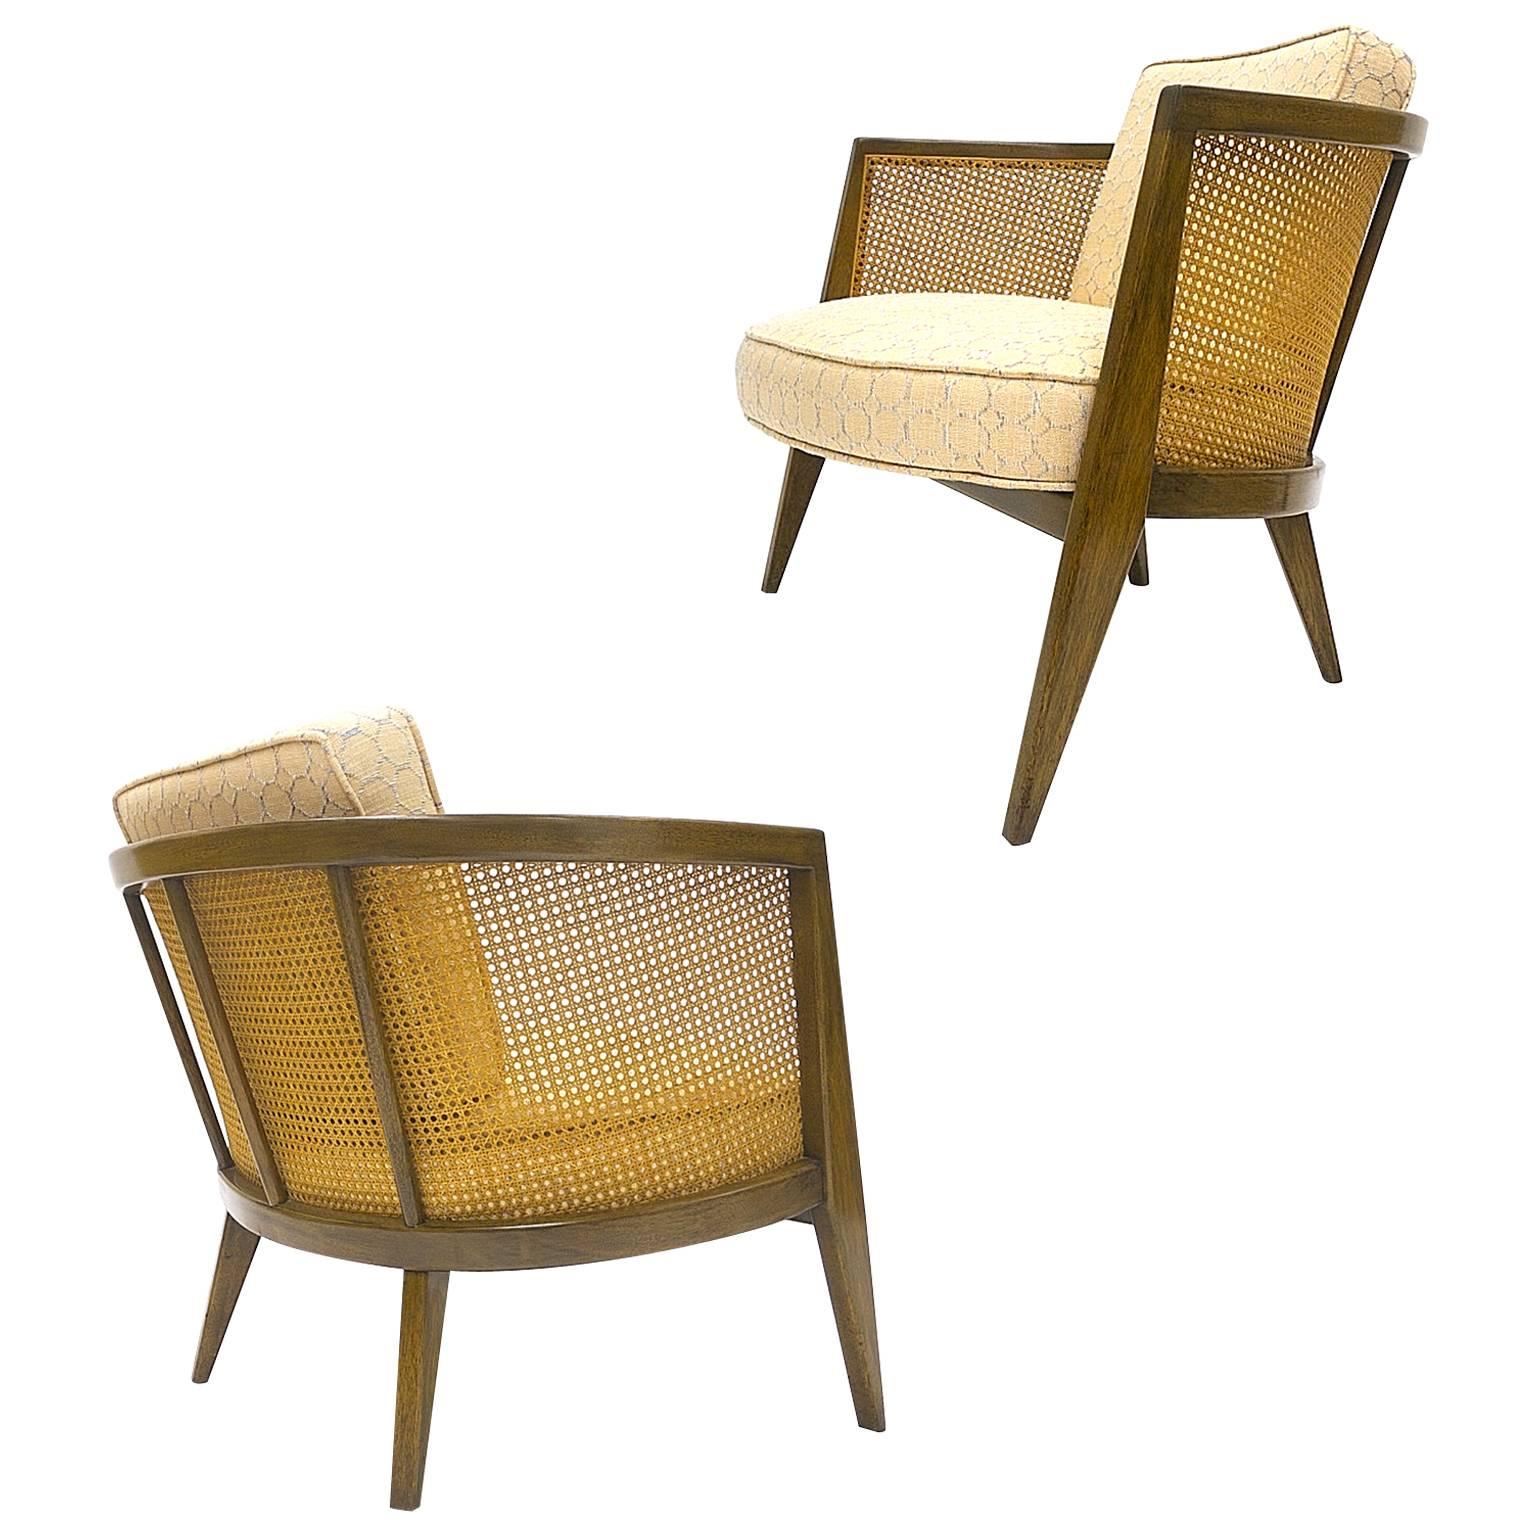 Rare Pair of Harvey Probber Cane Barrel Back Lounge Chairs Excellent Condition